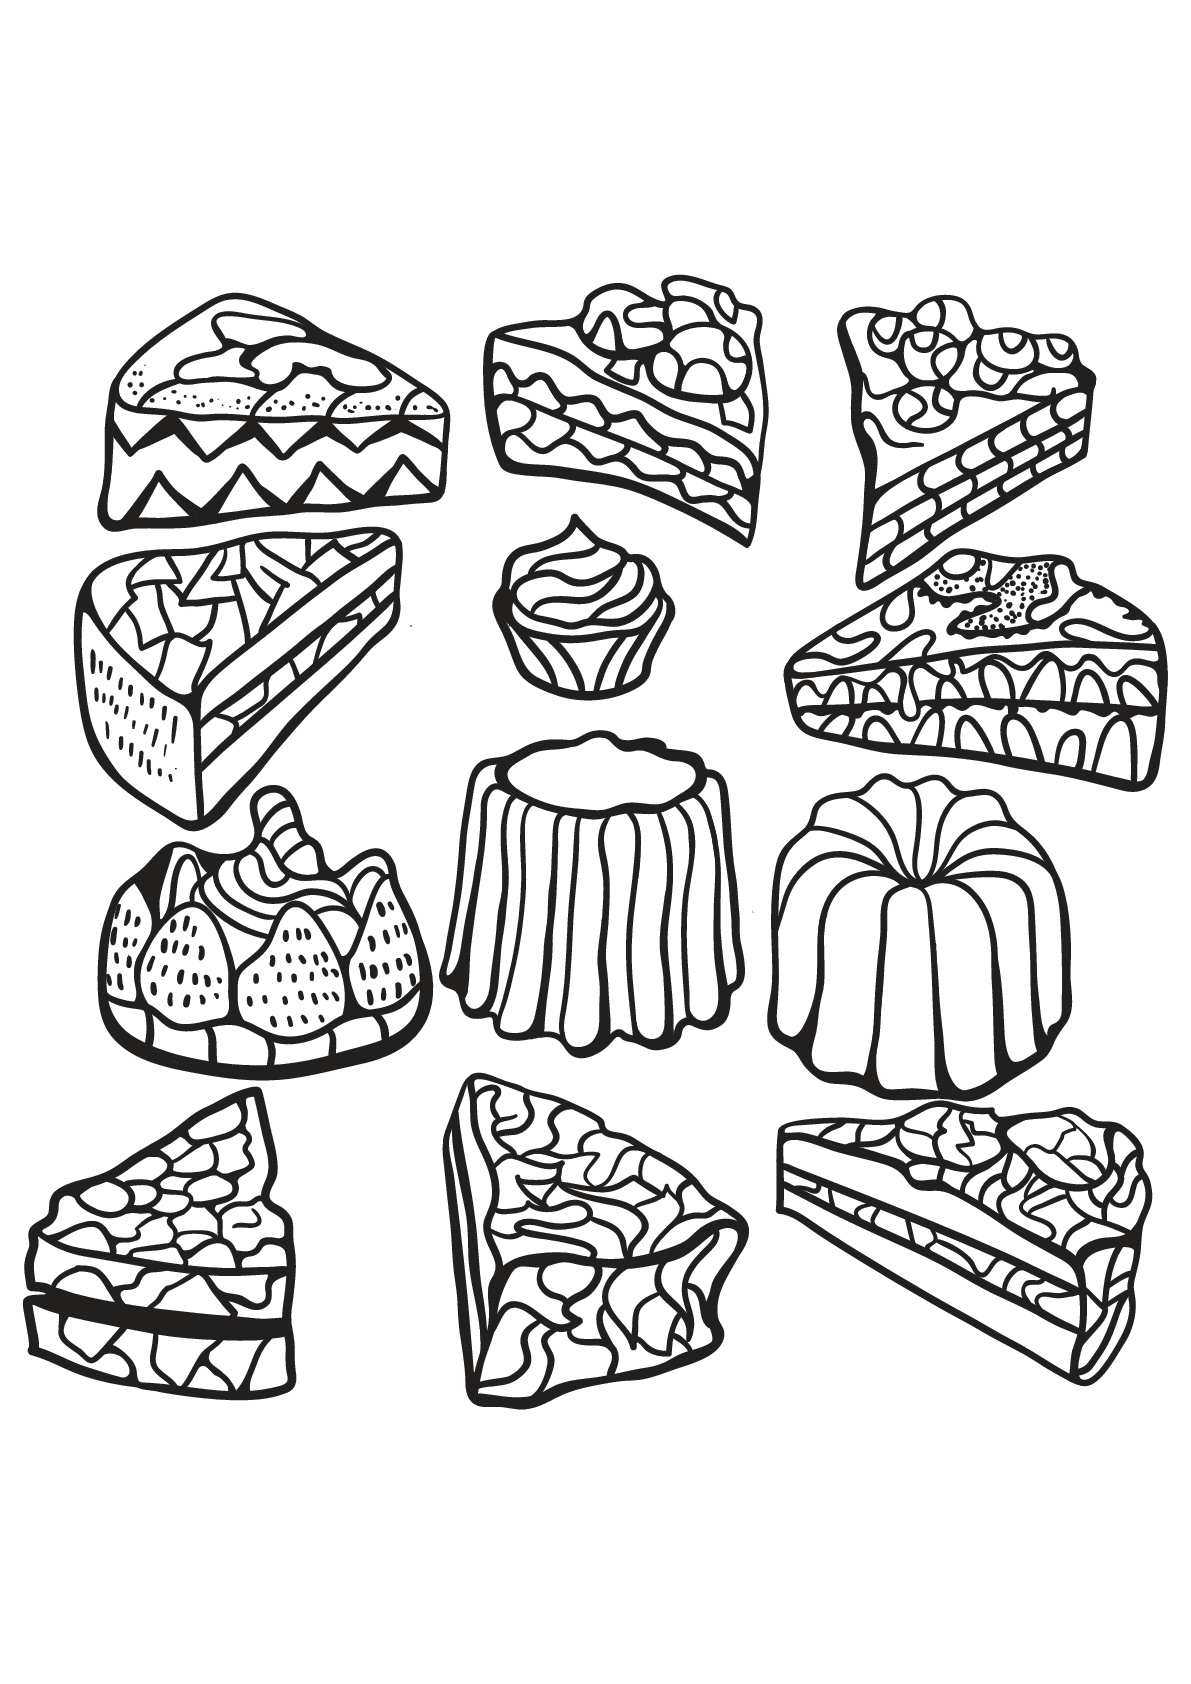 Free book cupcake - 6 - Cupcakes Adult Coloring Pages